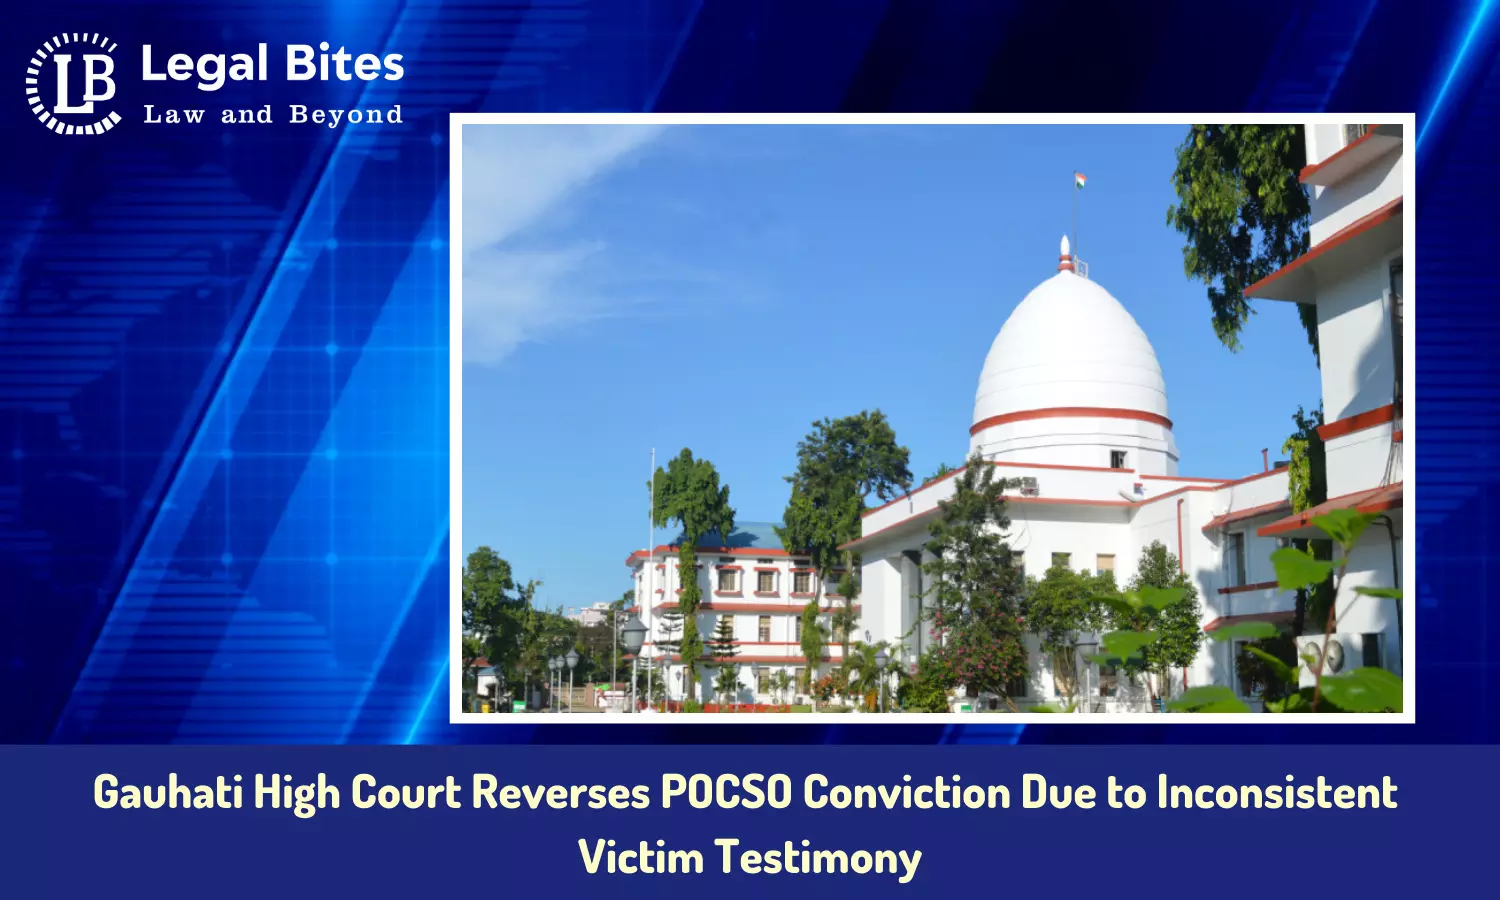 Gauhati High Court Reverses POCSO Conviction Due to Inconsistent Victim Testimony and Lack of Medical Evidence for Sexual Assault